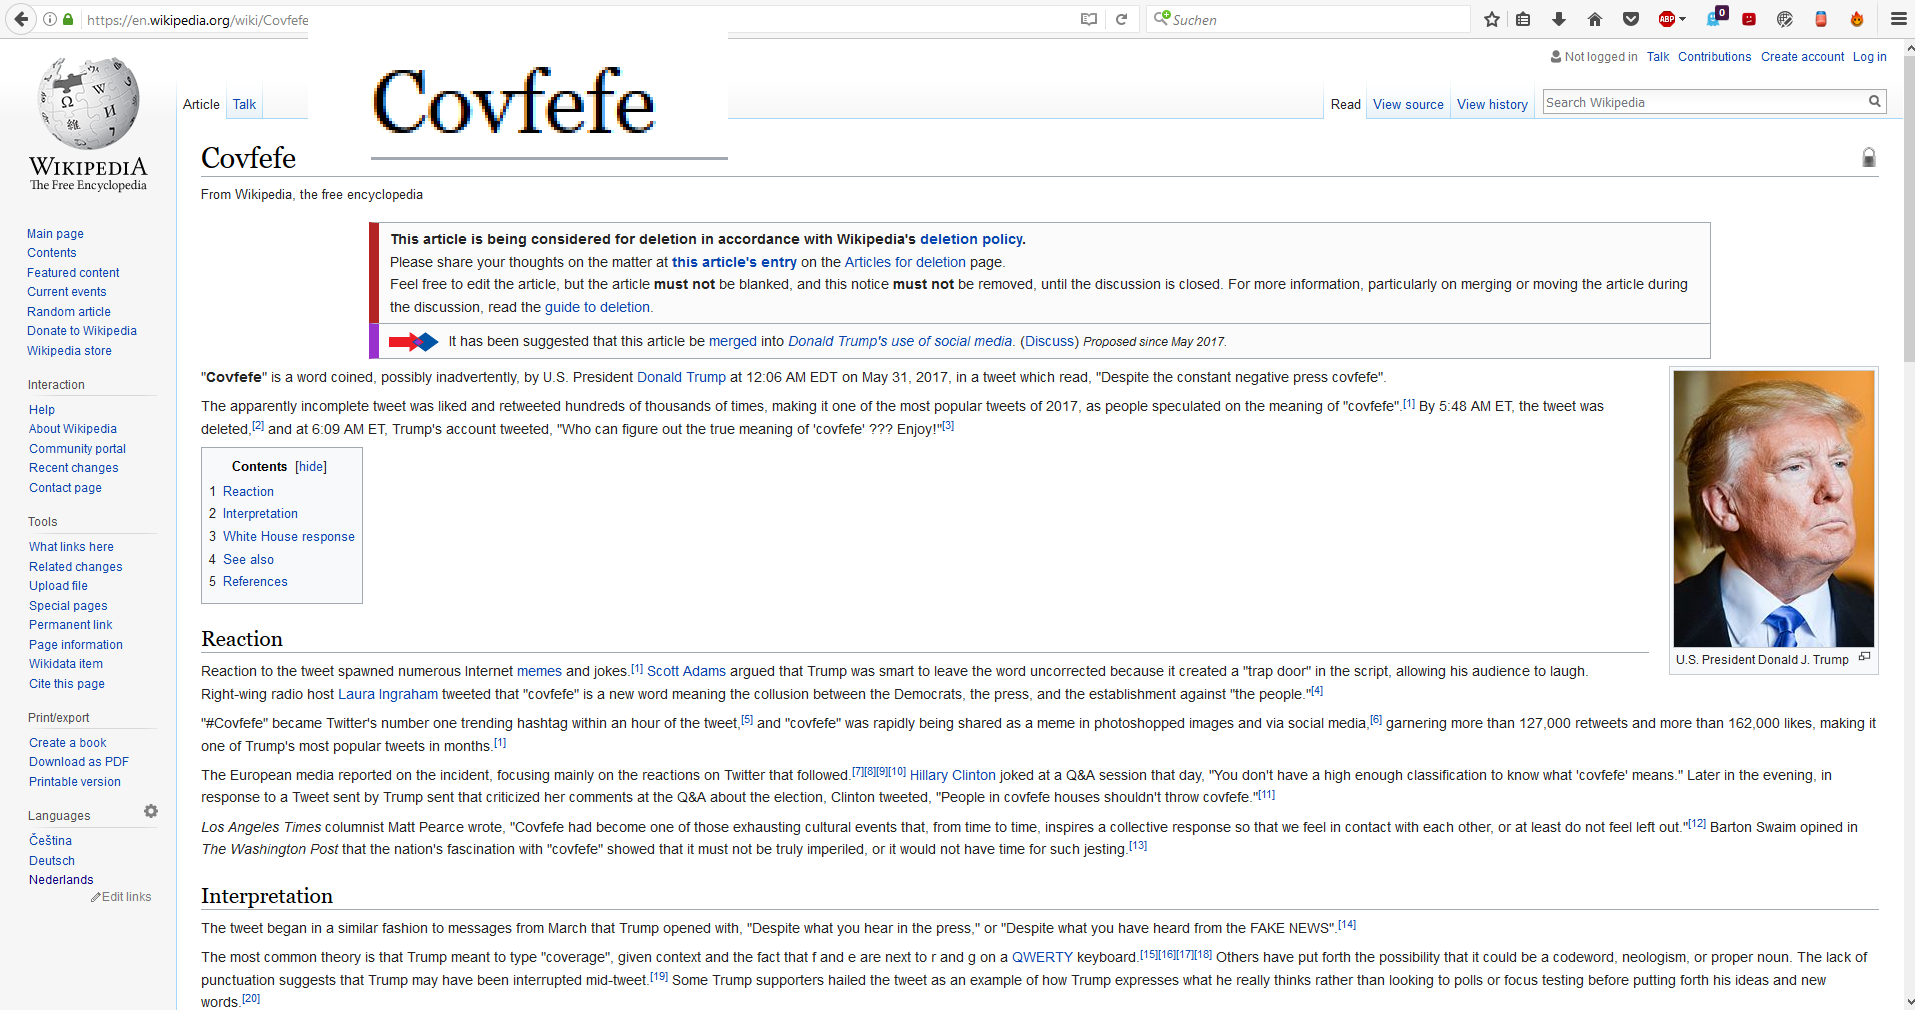 So there is a Wikipedia page...